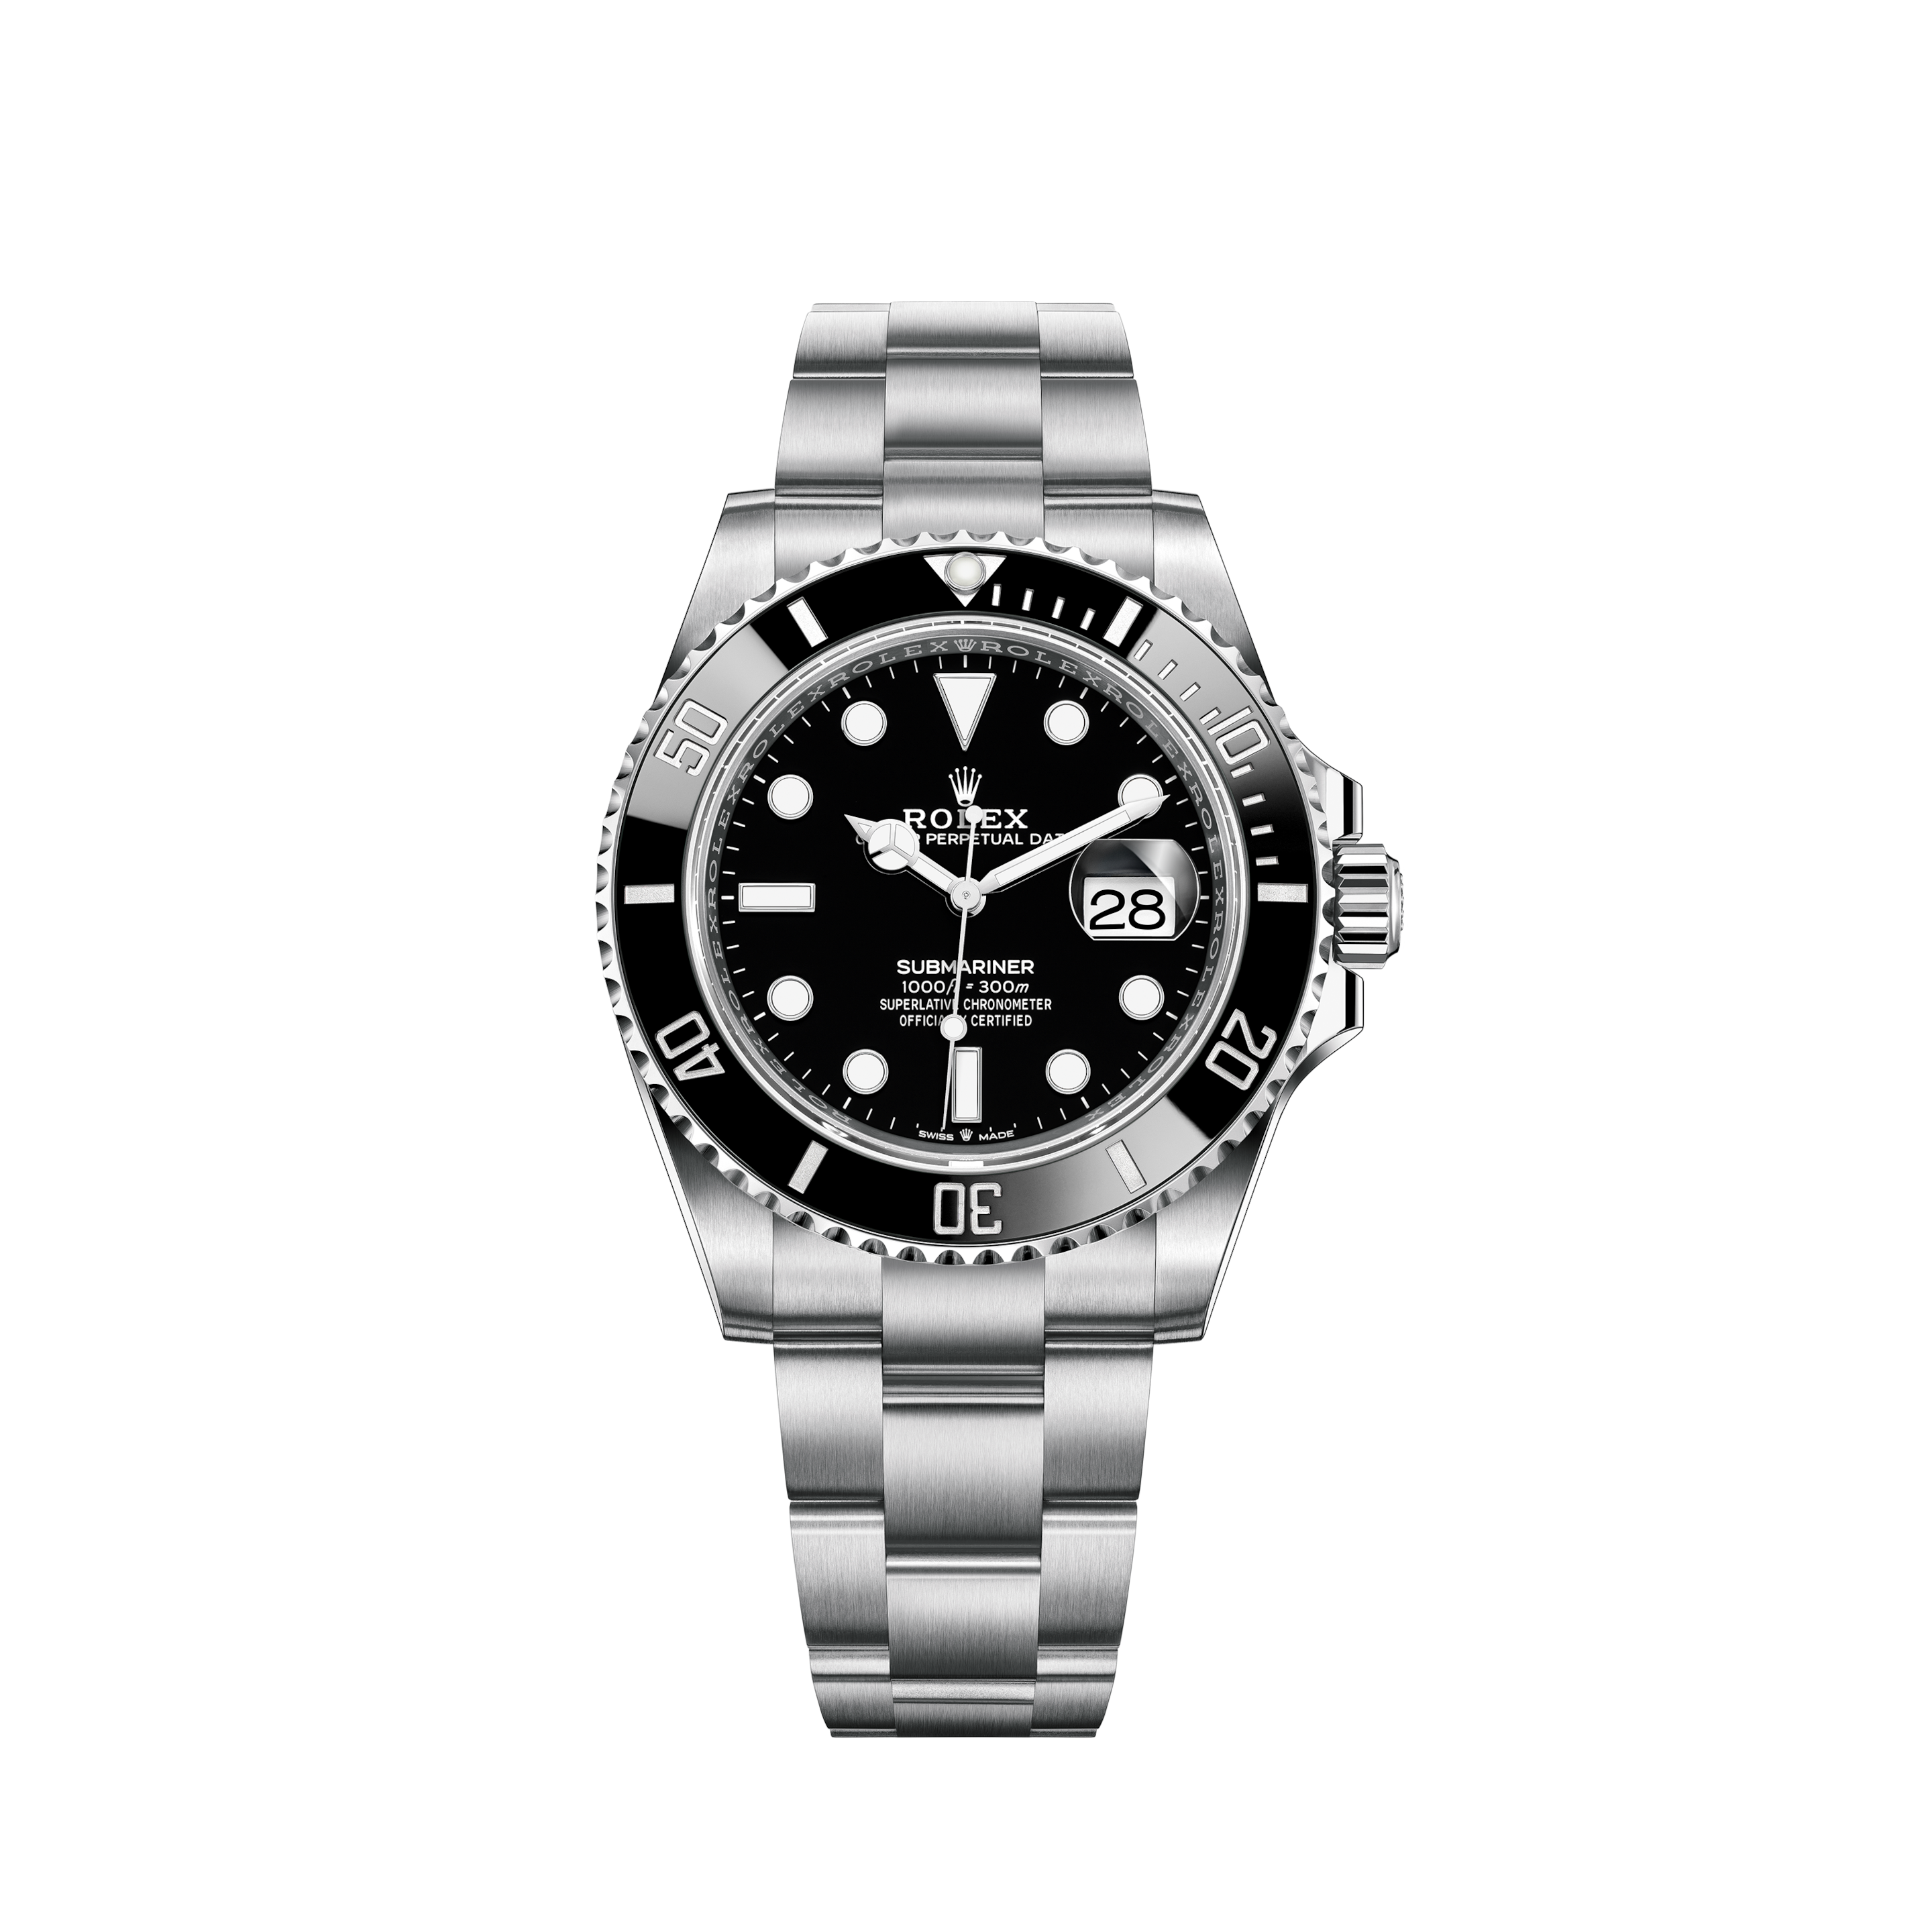 Rolex Submariner reference 5512 from 1965 with a gilt four liner dial